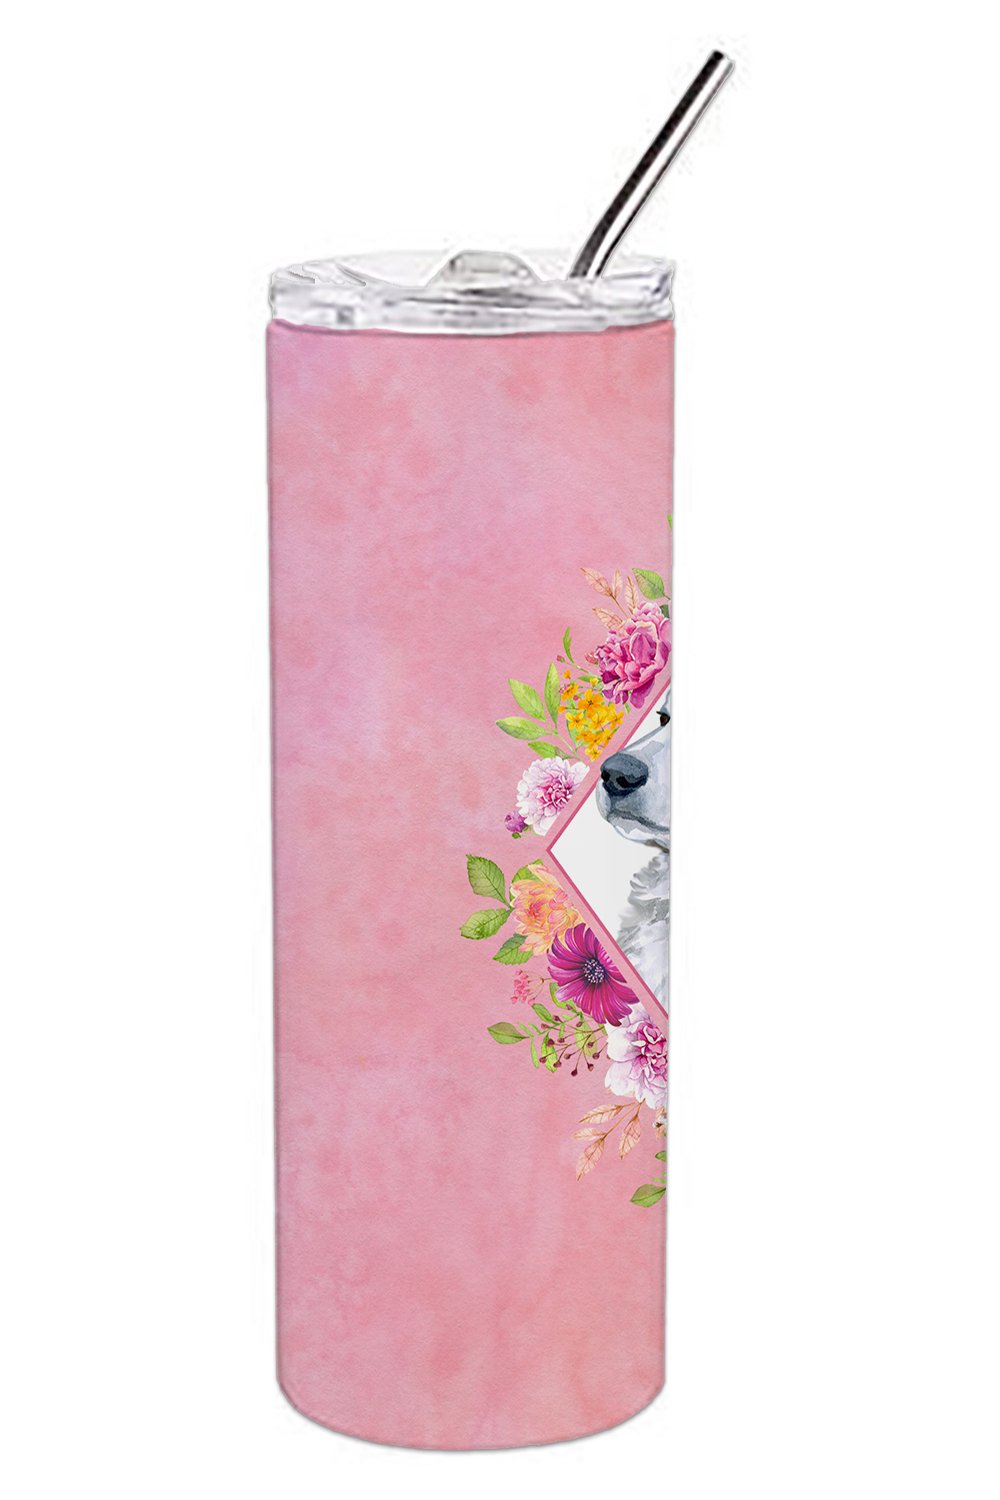 Great Pyrenees Pink Flowers Double Walled Stainless Steel 20 oz Skinny Tumbler CK4160TBL20 by Caroline's Treasures